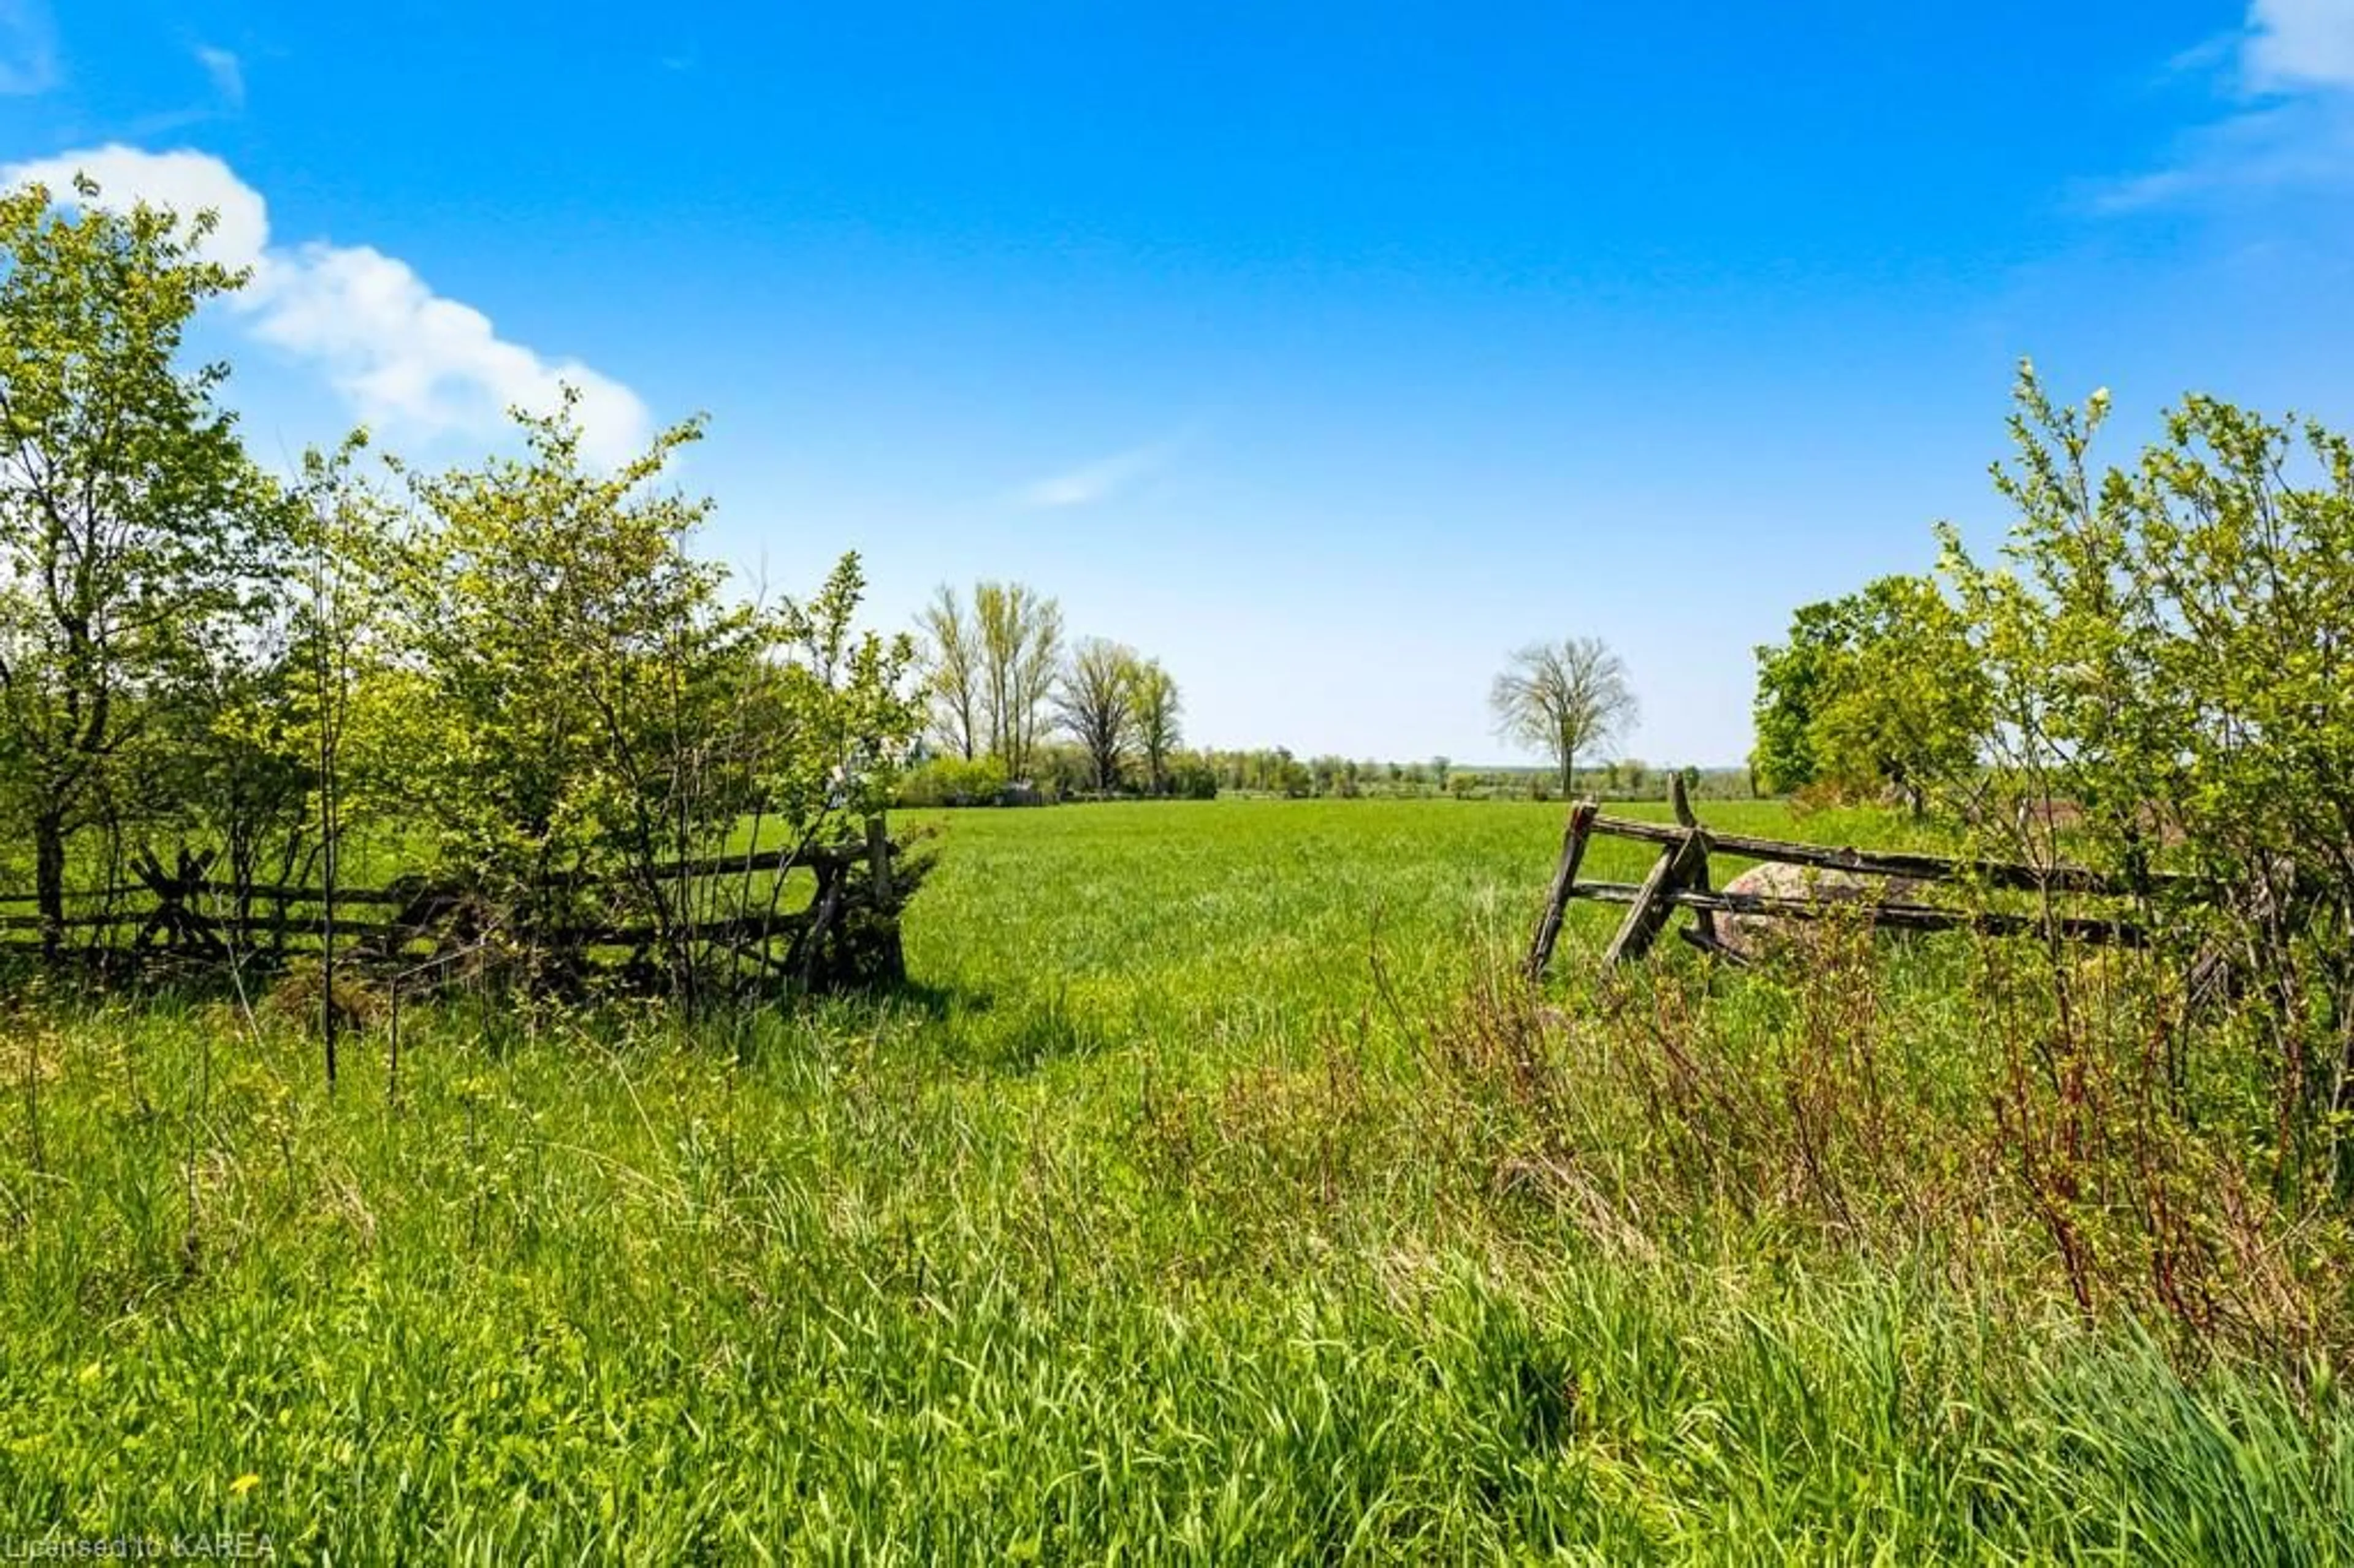 Fenced yard for LOT 16 Concession 6c Rd, Middleville Ontario K0G 1K0